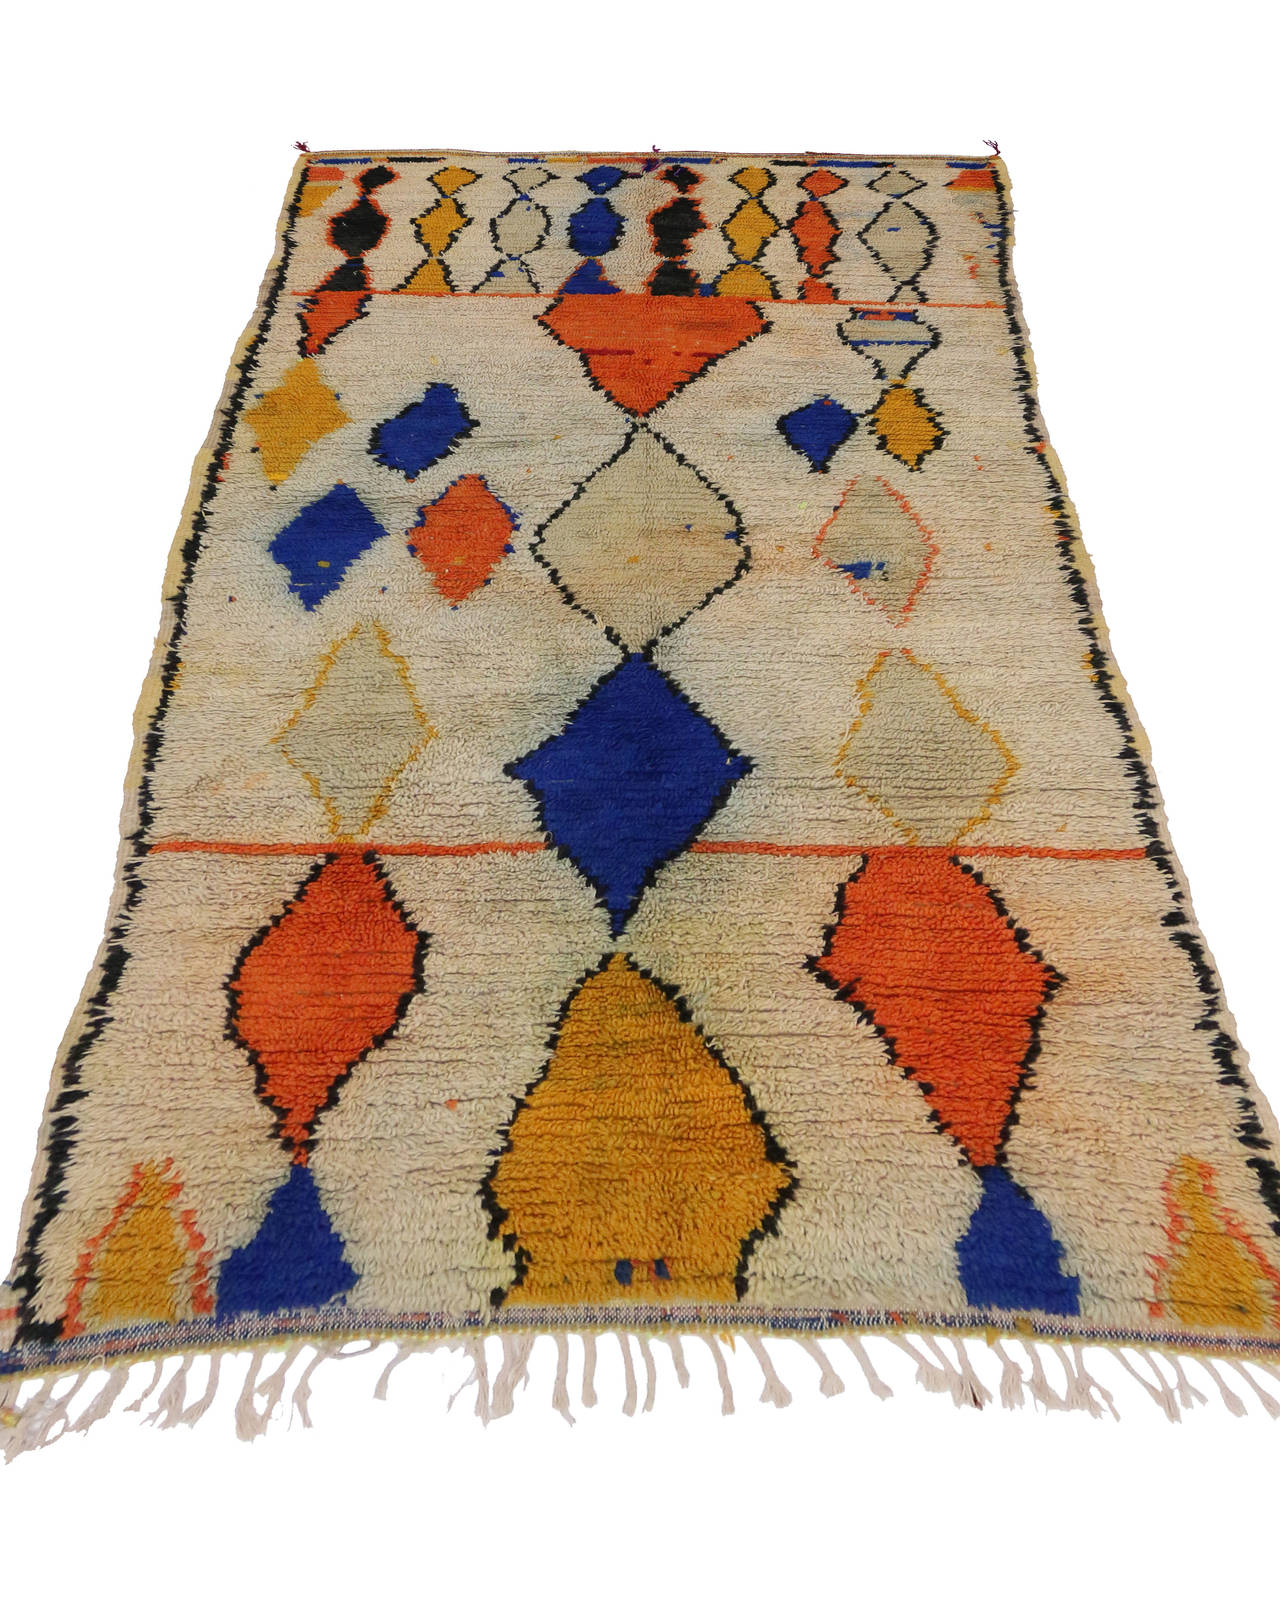 Wool Mid-Century Modern Berber Moroccan Rug with Abstract Design